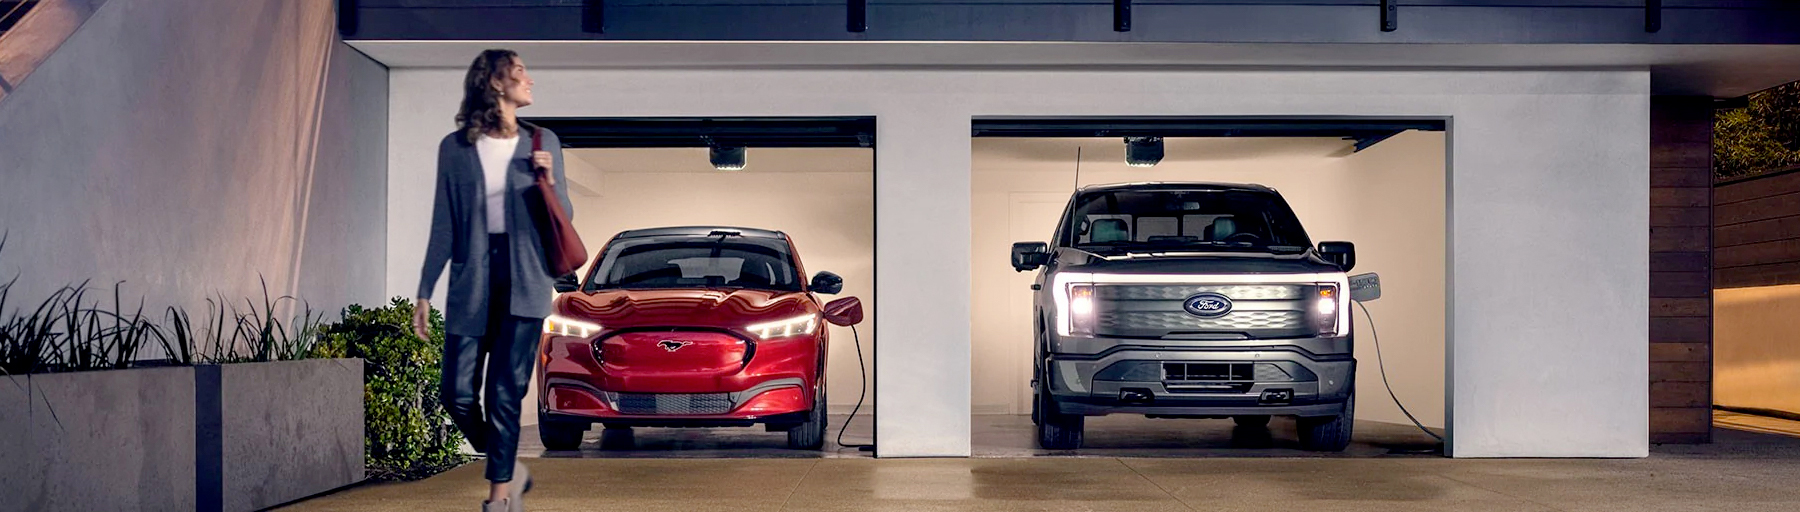 A 2022 Ford Mustang Mach-E® and a Ford F-150 Lightning are being charged in a garage at night near two people